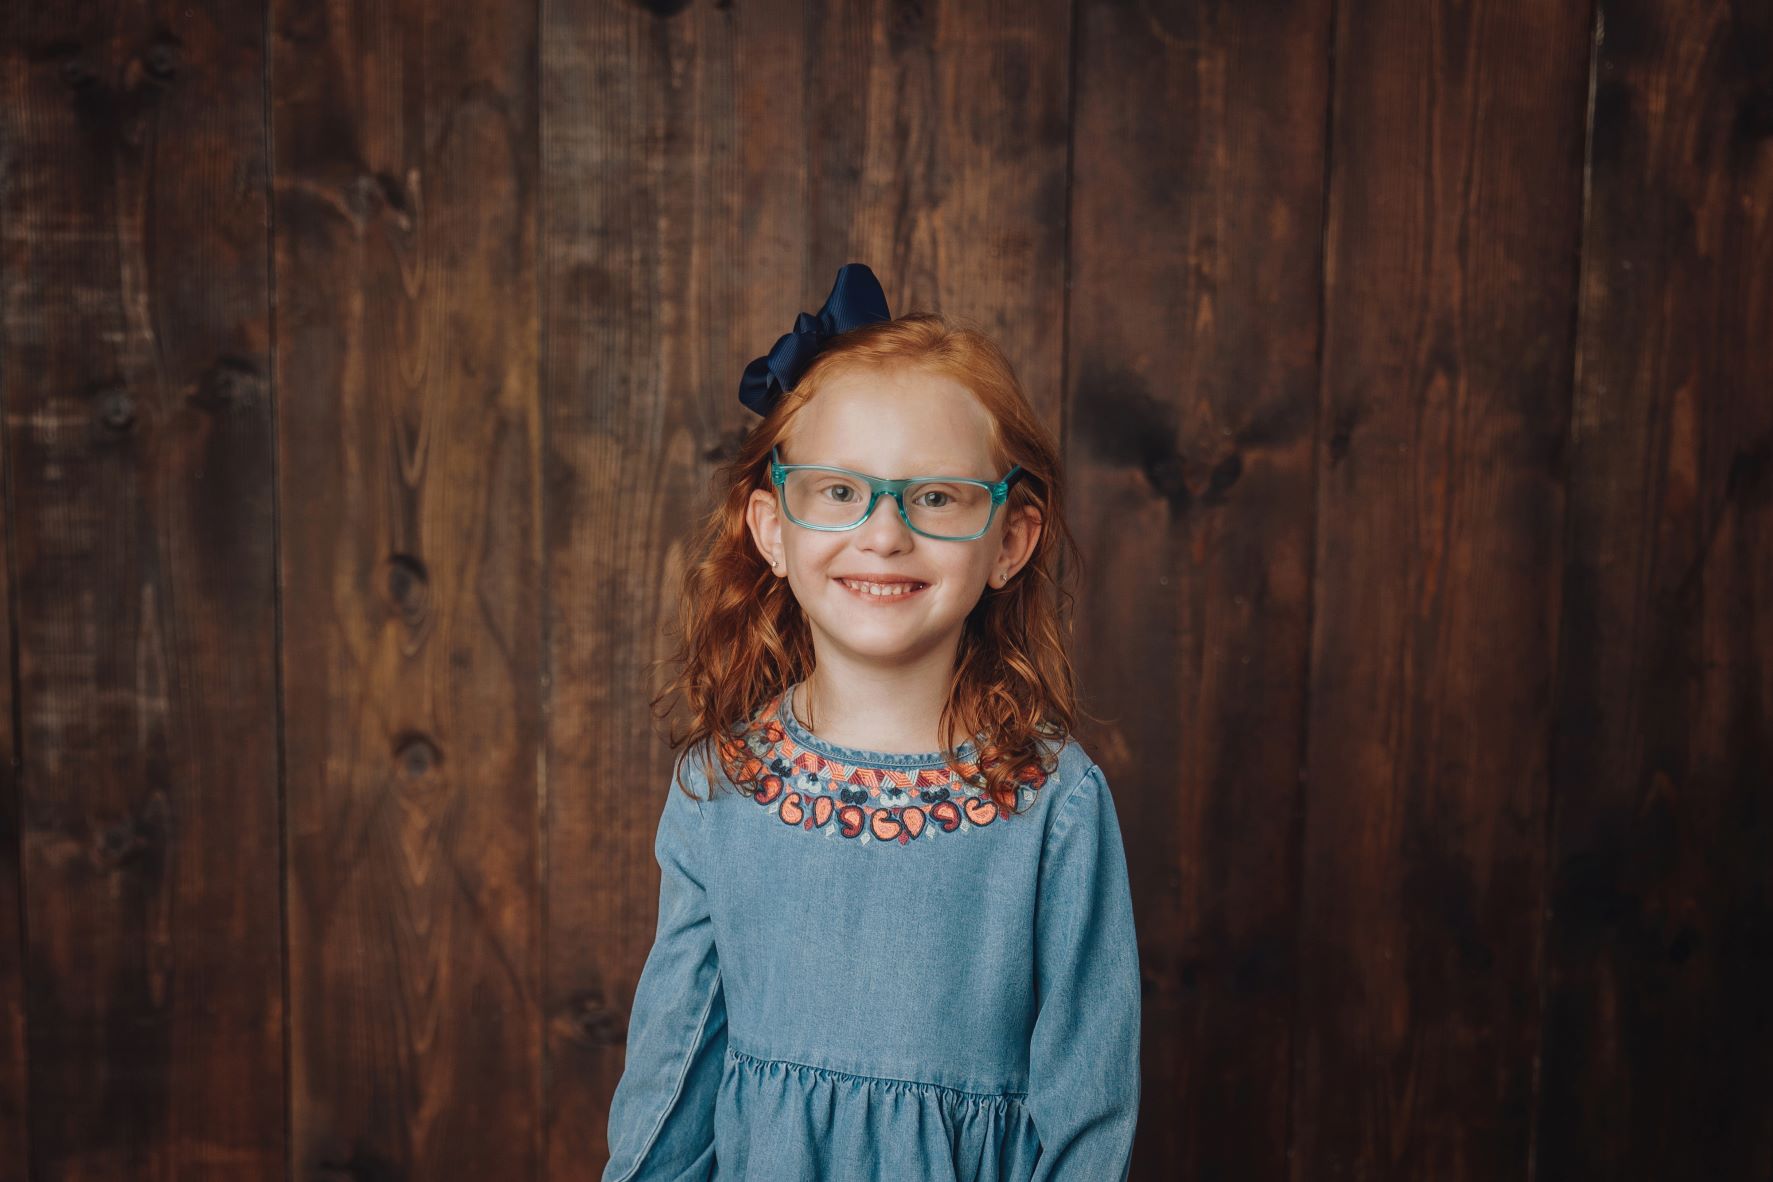 Girl smiling at the camera wearing a black bow, pale blue dress, and blue glasses in front of a dark wooden wall